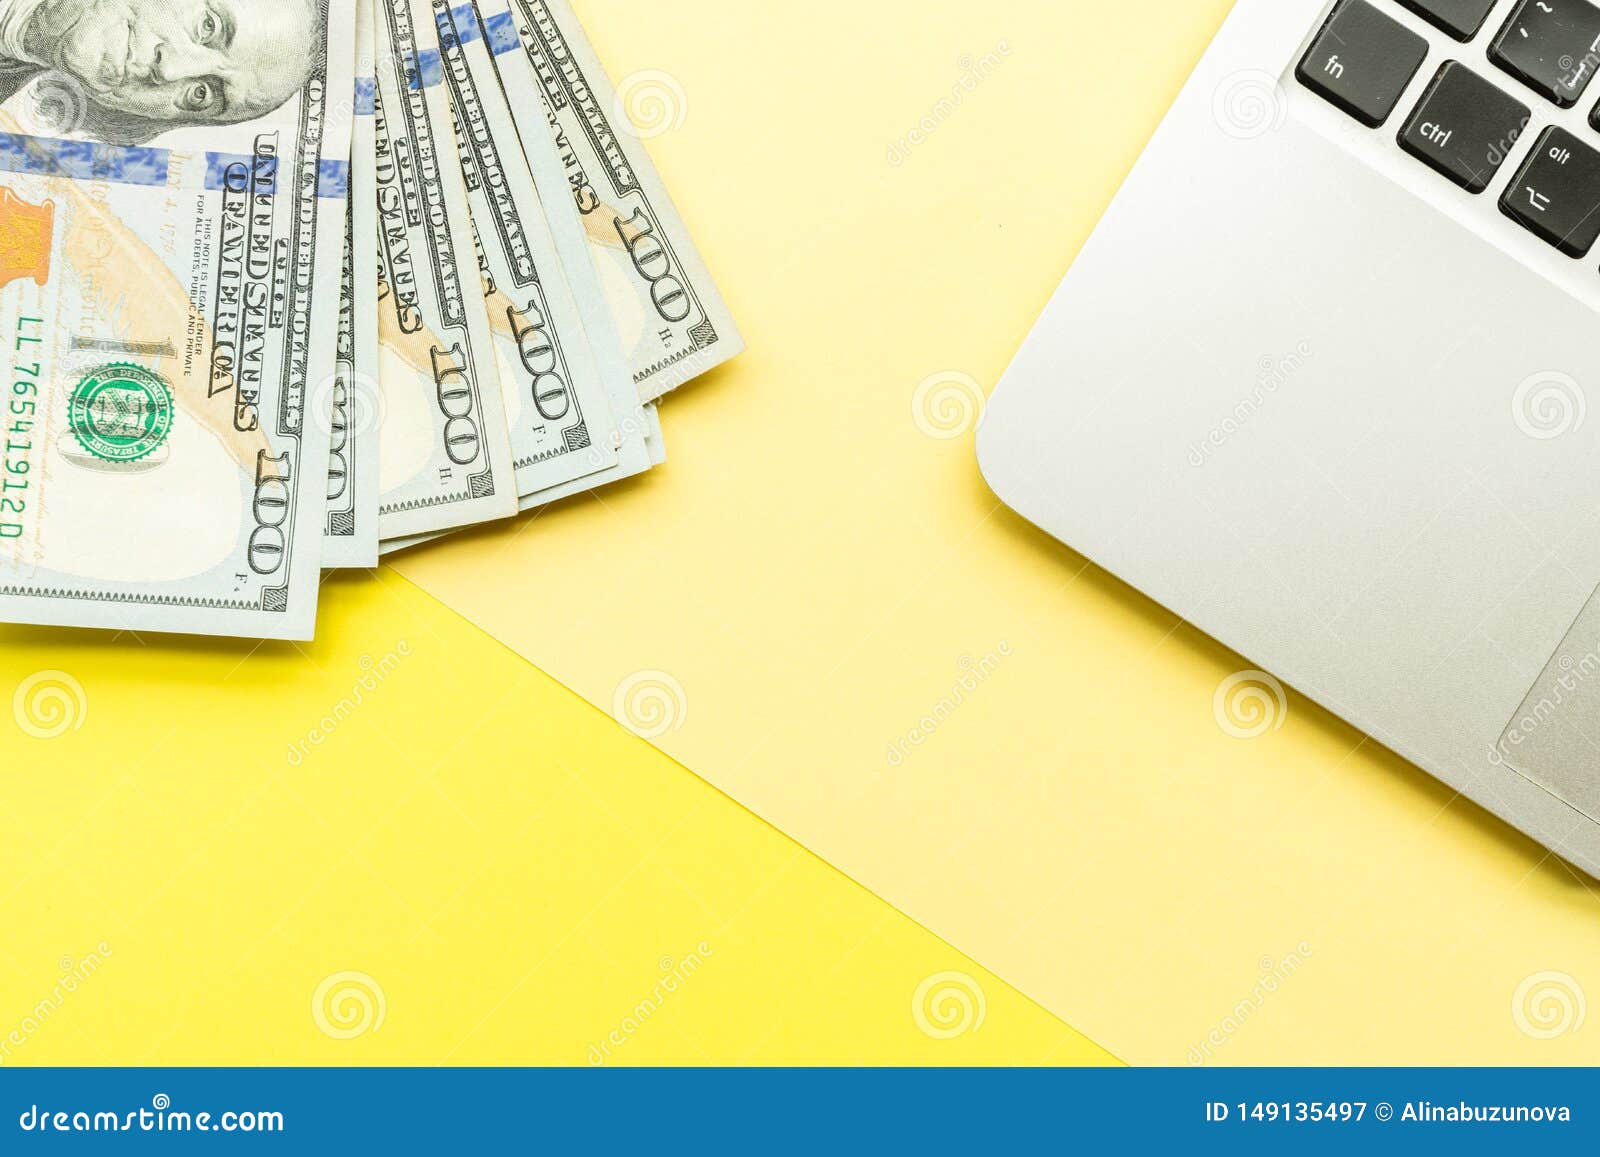 Download Mockup Blank Page With Laptop And Cash Money On Yellow ...